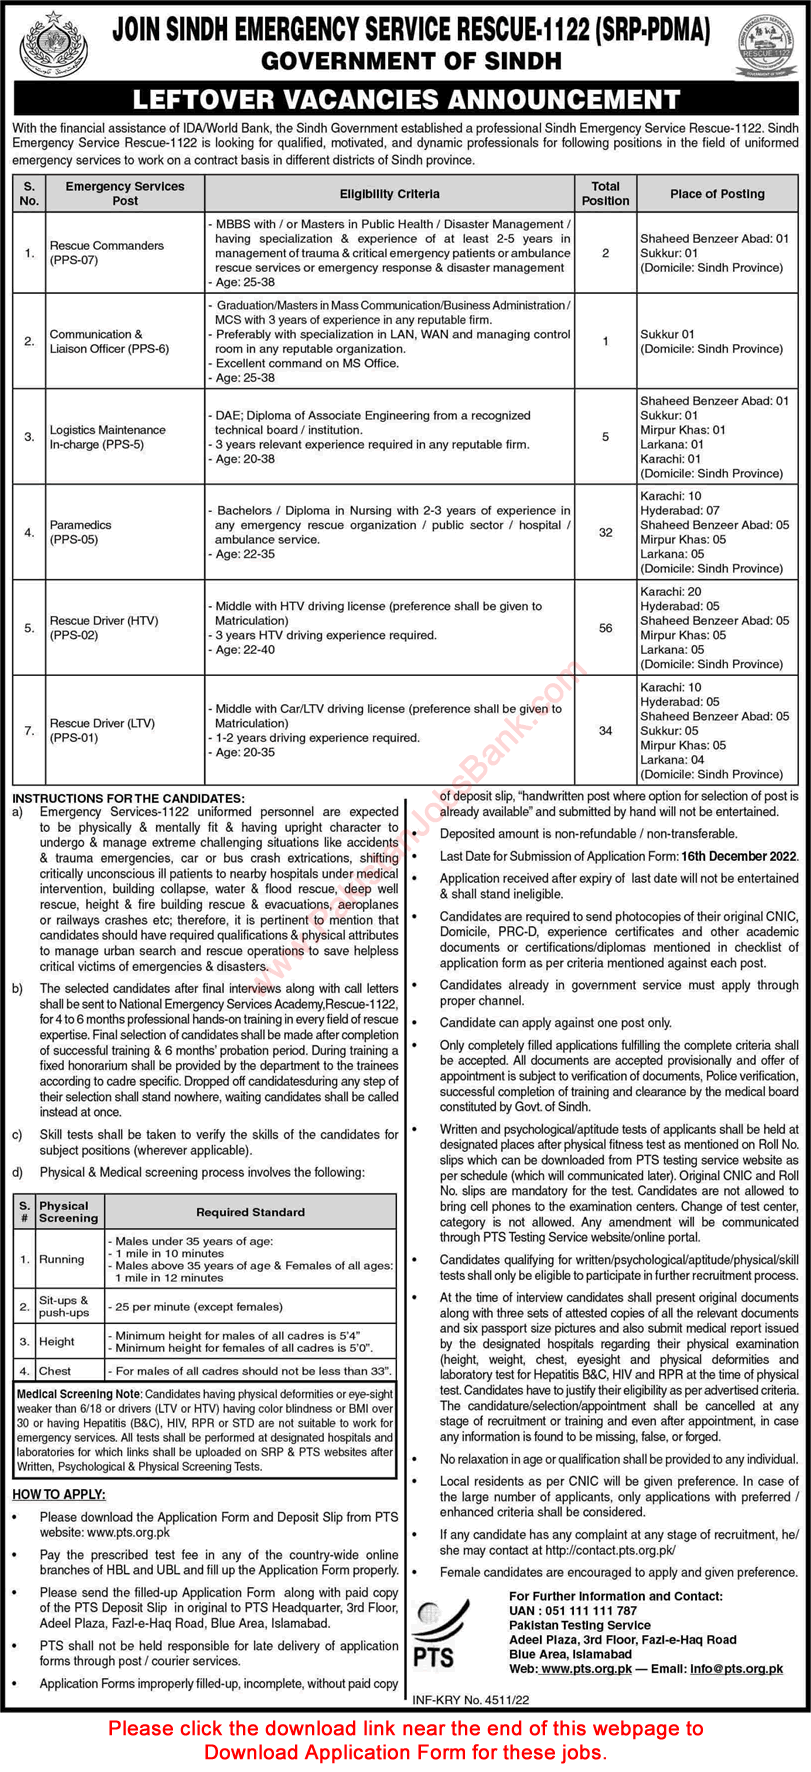 Sindh Emergency Service Rescue 1122 Jobs December 2022 PTS Application Form Rescue Drivers, Paramedics Staff & Others Latest